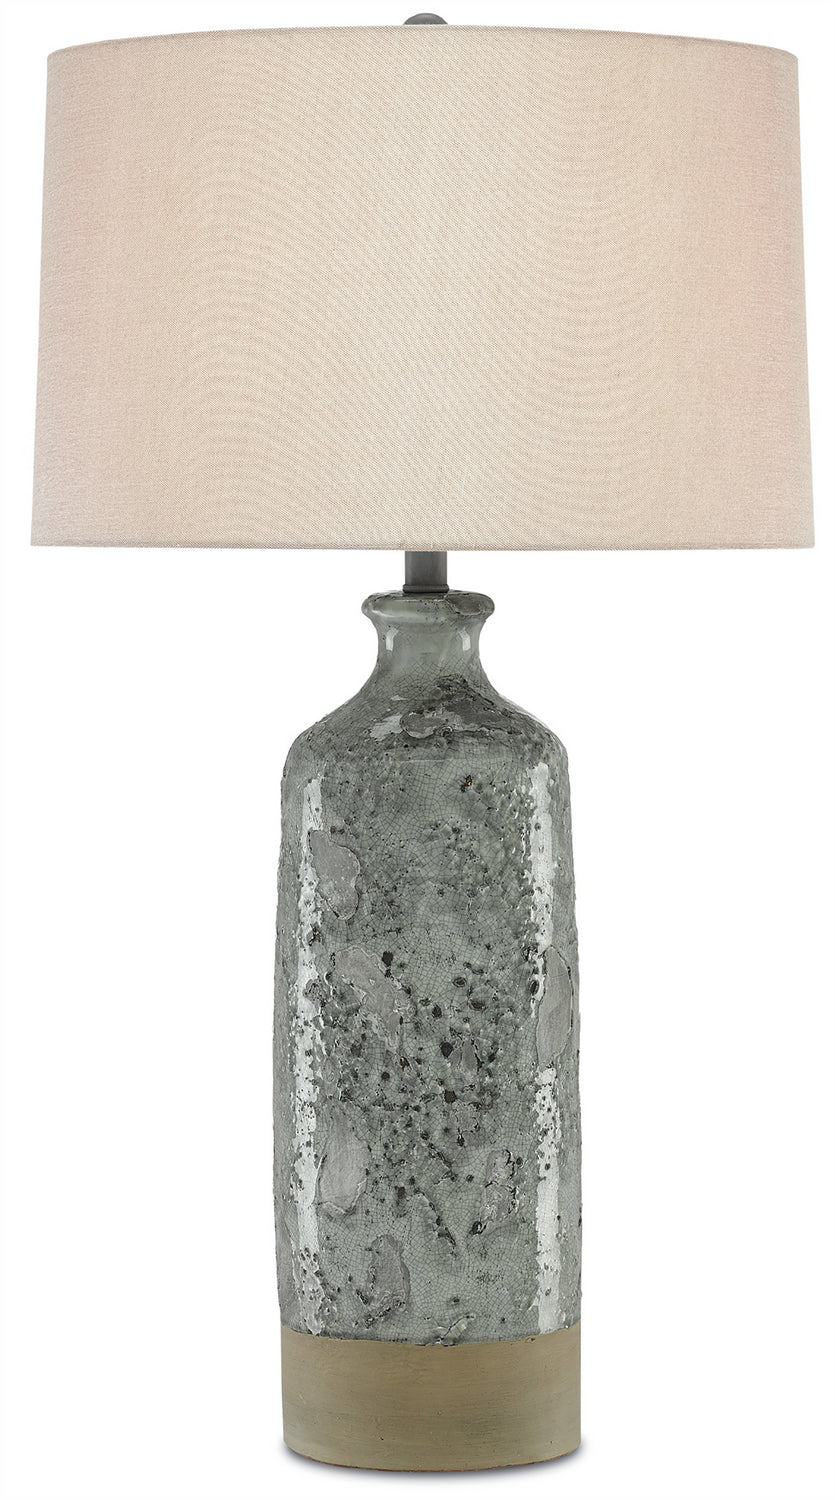 One Light Table Lamp from the Stargazer collection in Celadon Crackle/Gray finish